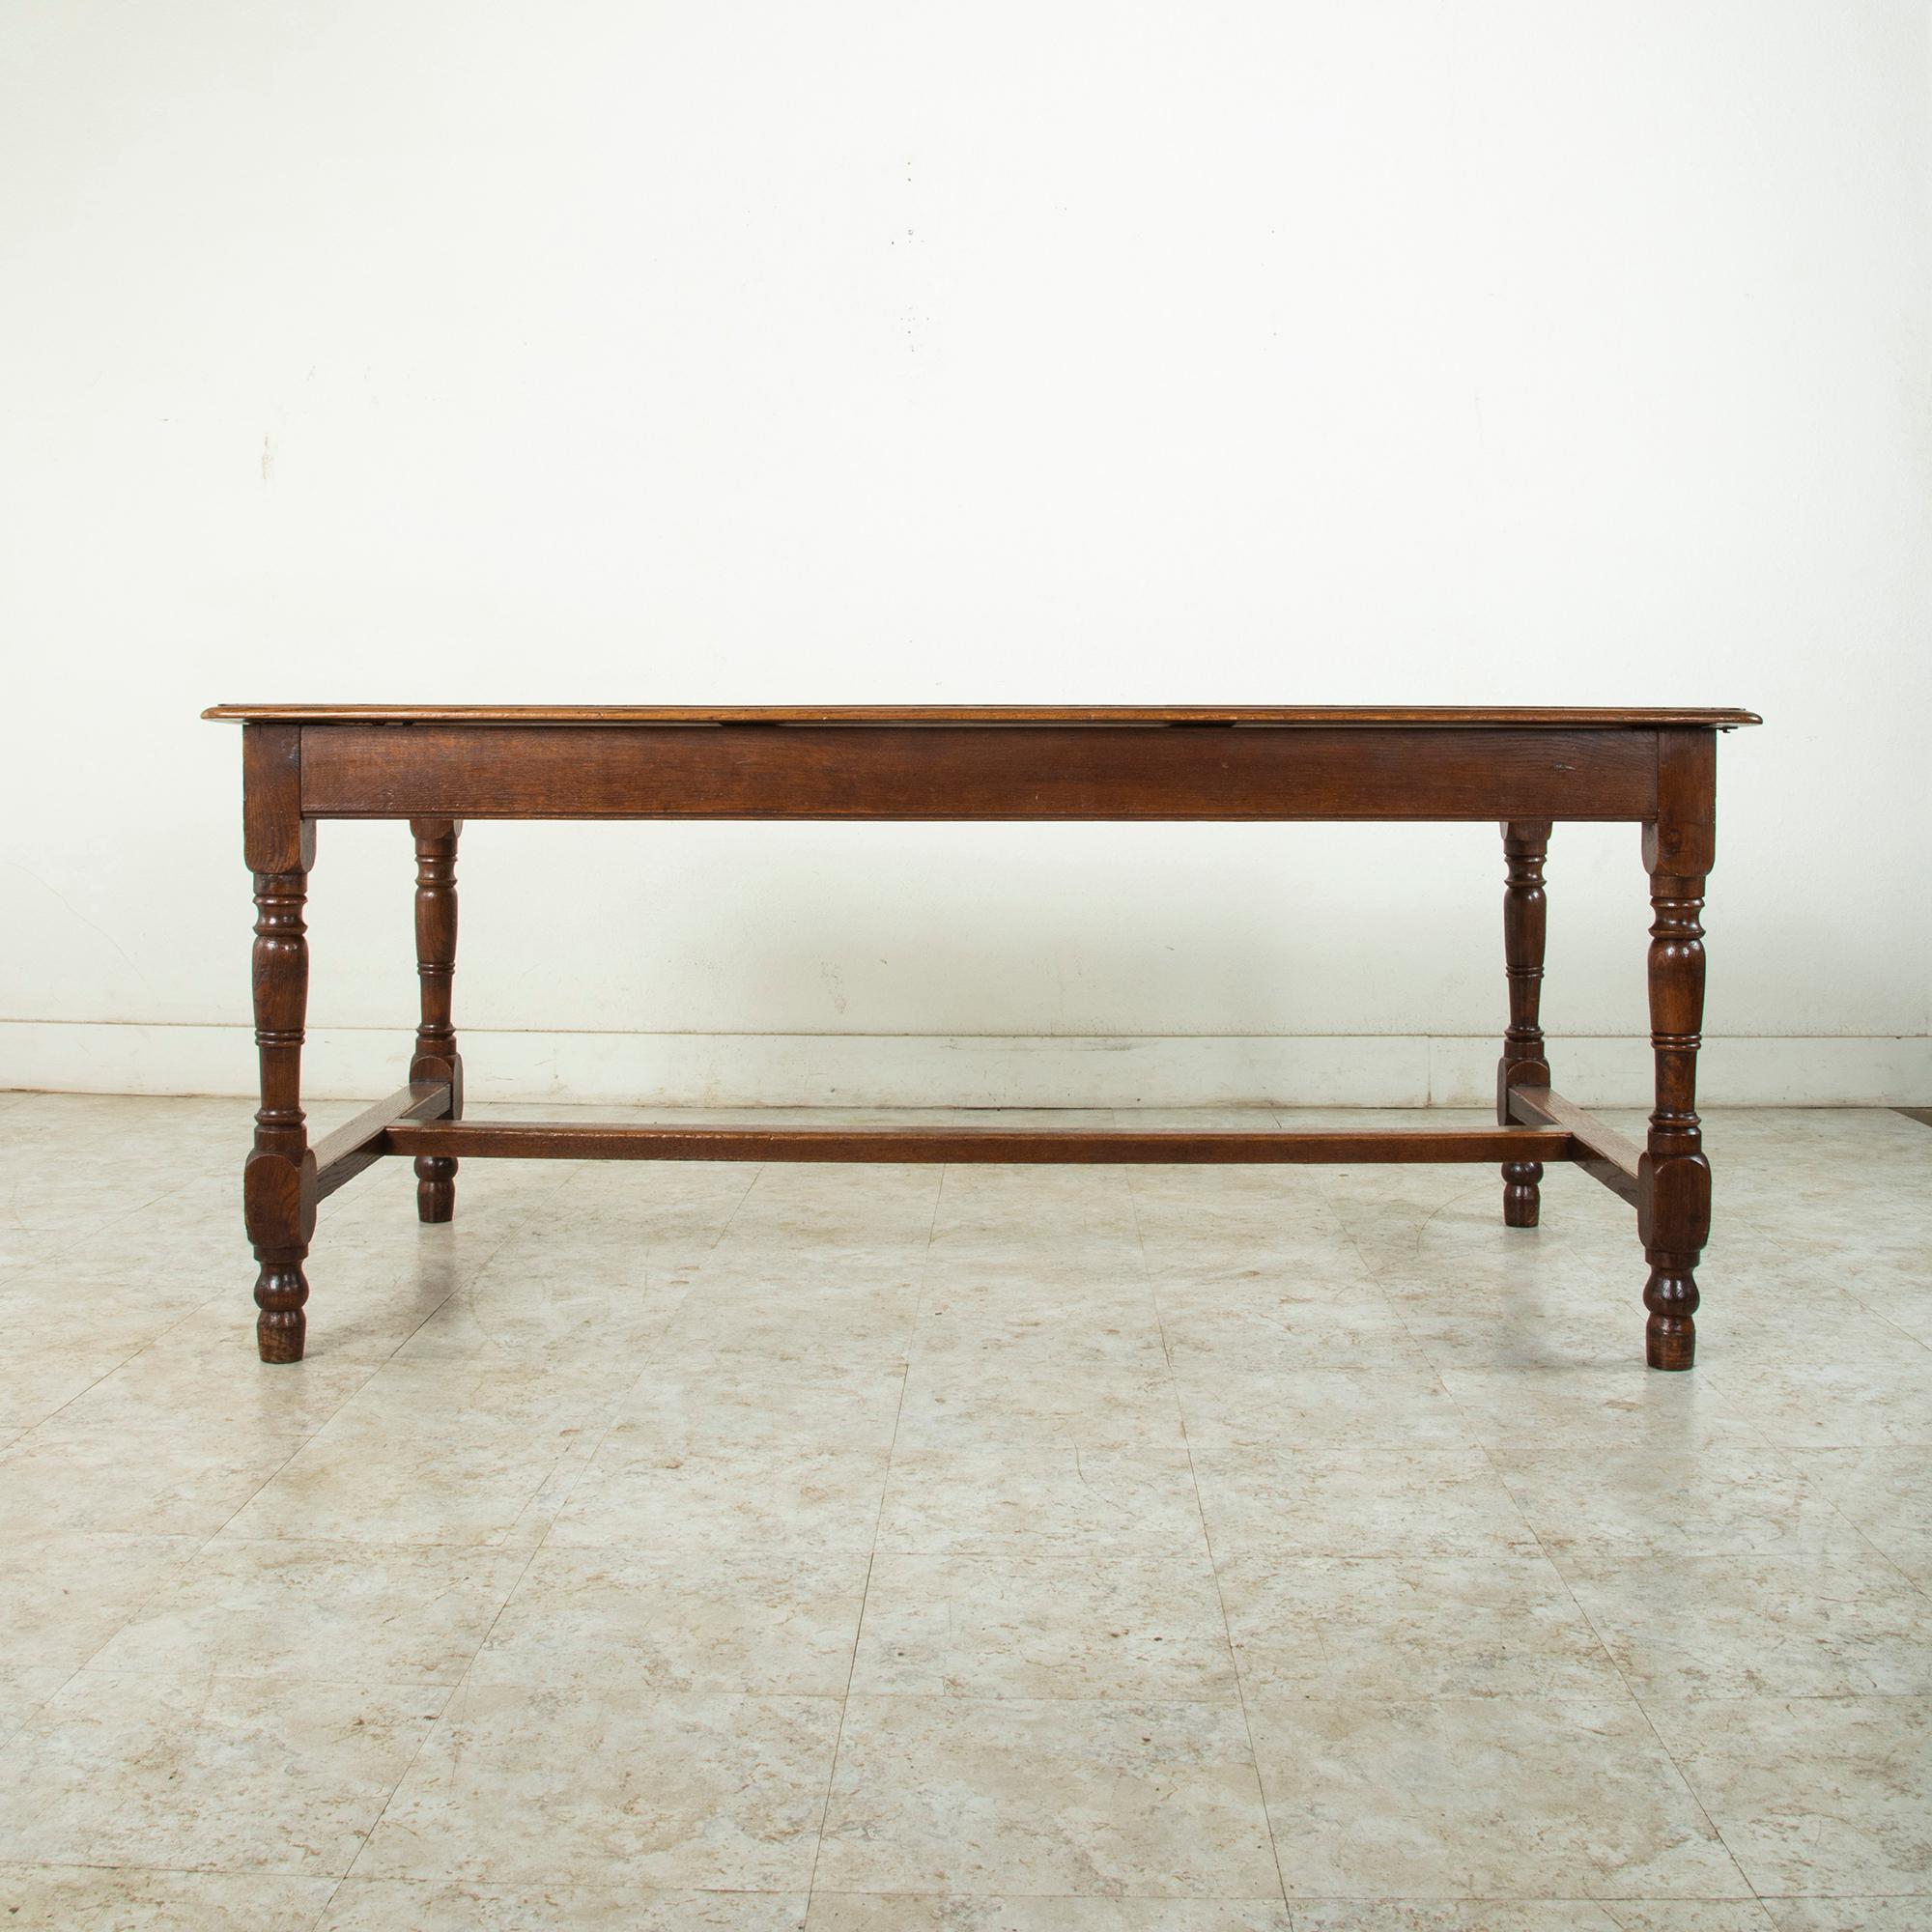 Found in Normandy, France, this French artisan made oak farm table or dining table from the turn of the 20th century features a beveled top constructed of six planks of wood. The top rests on turned legs joined by an H stretcher to provide